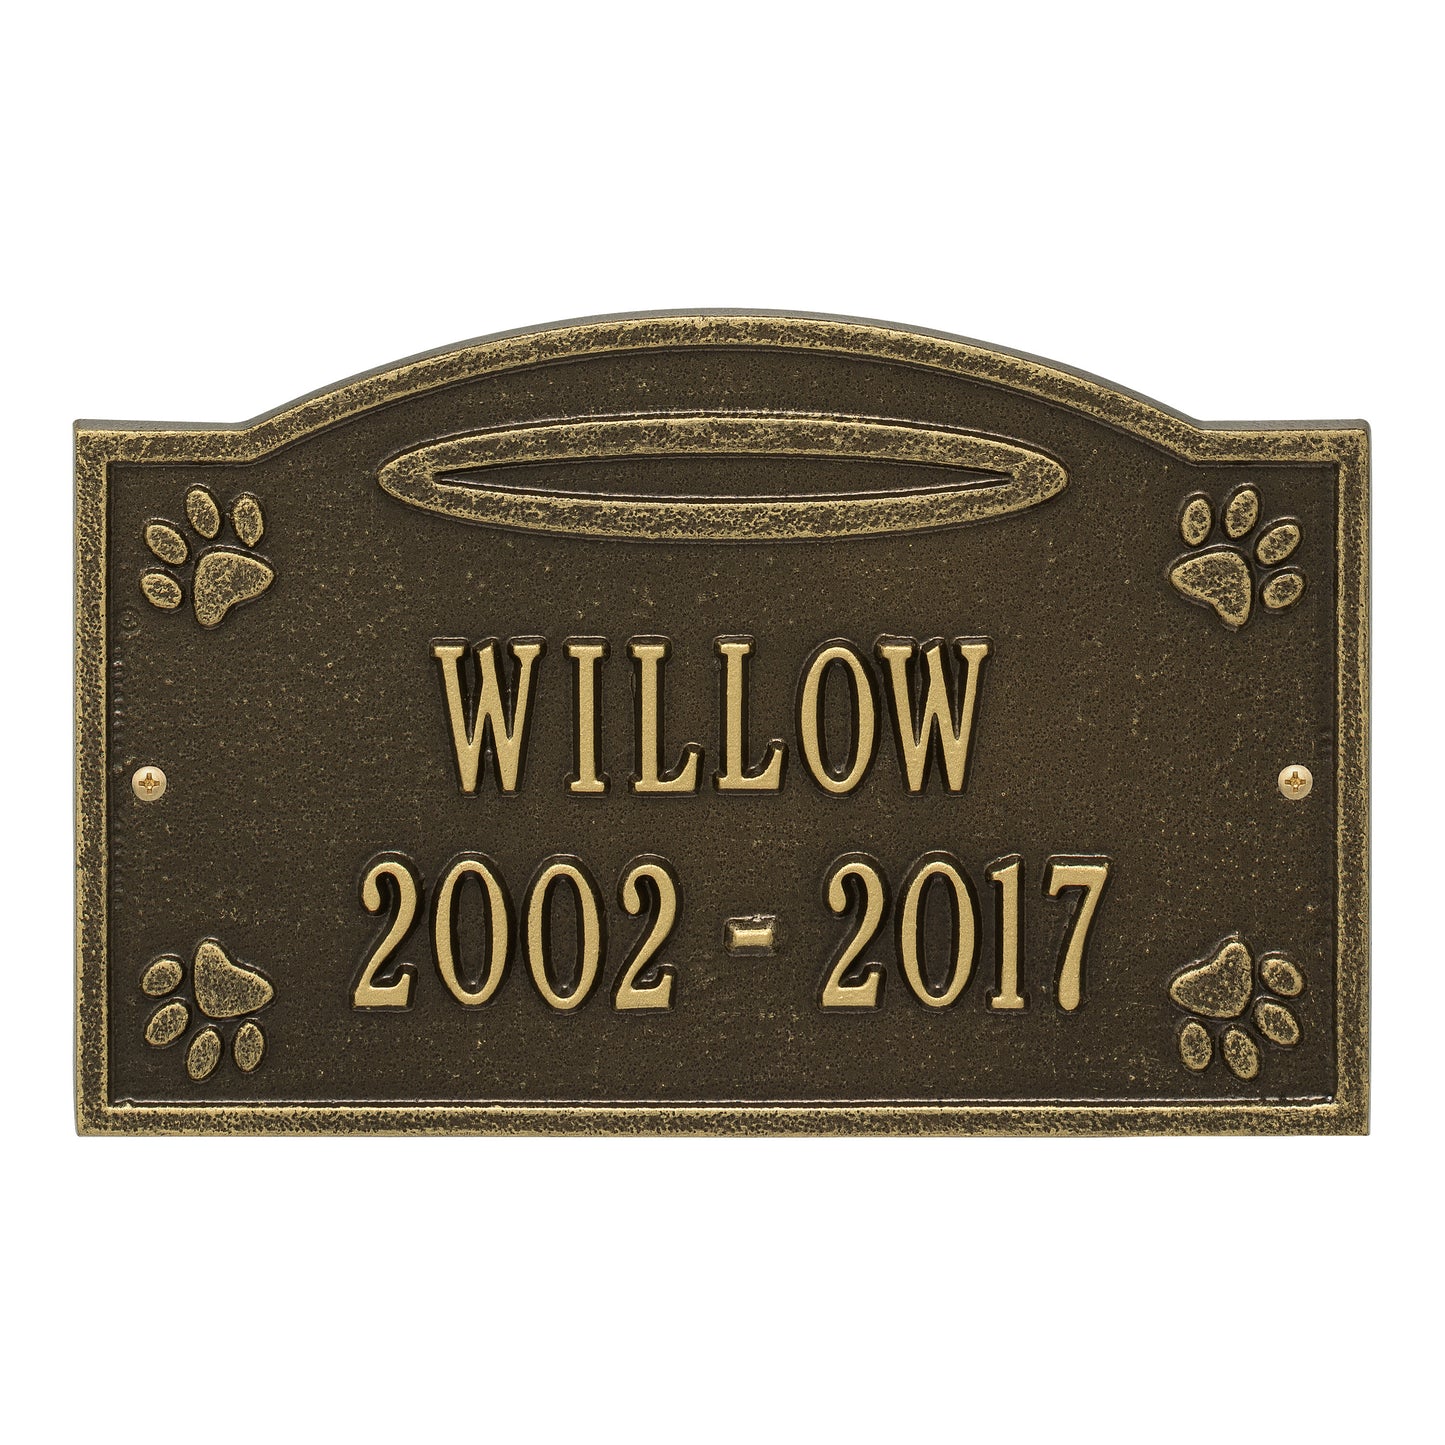 Whitehall Products Angel In Heaven Pet Memorial Personalized Wall Or Ground Plaque Two Lines Black/white